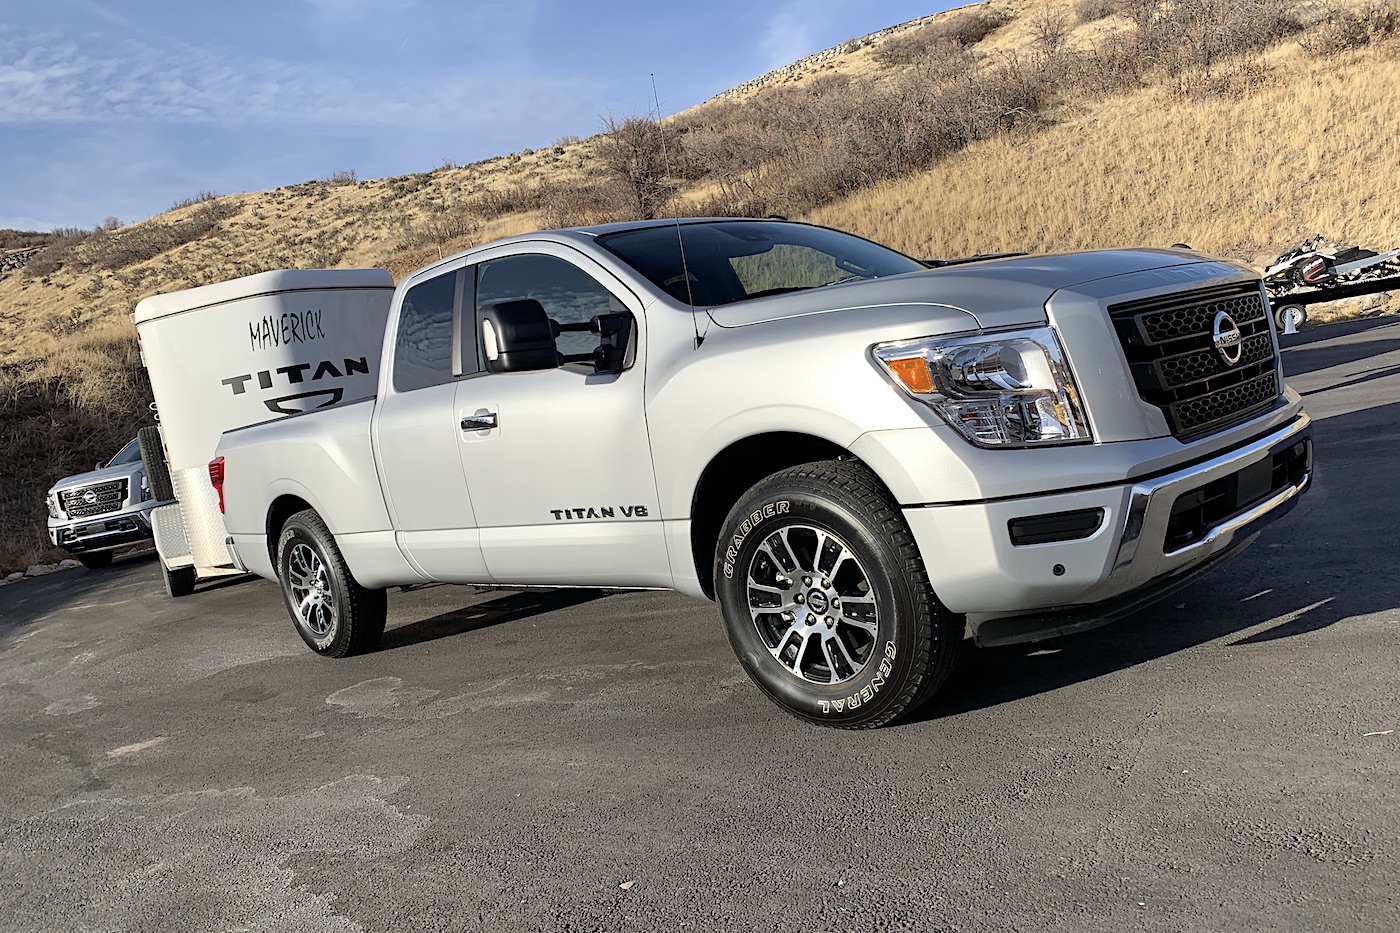 2020-nissan-titan-maximum-towing-payload - The Fast Lane Truck